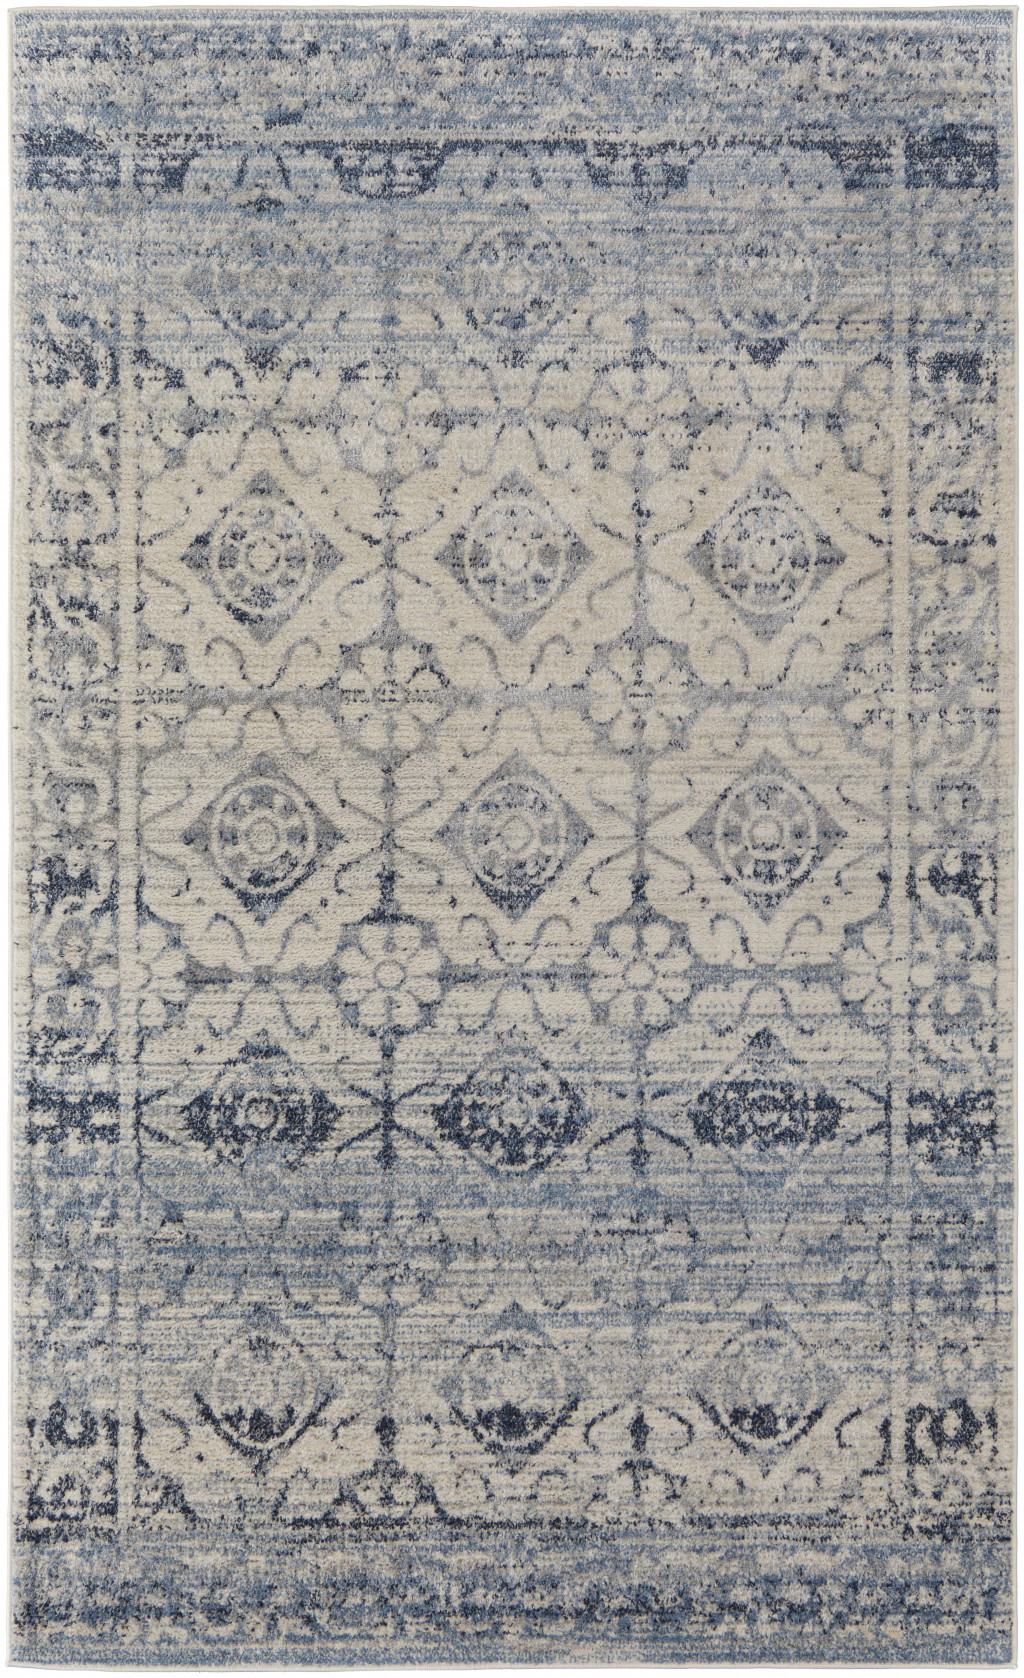 8' X 10' Blue And Ivory Power Loom Distressed Area Rug-515512-1